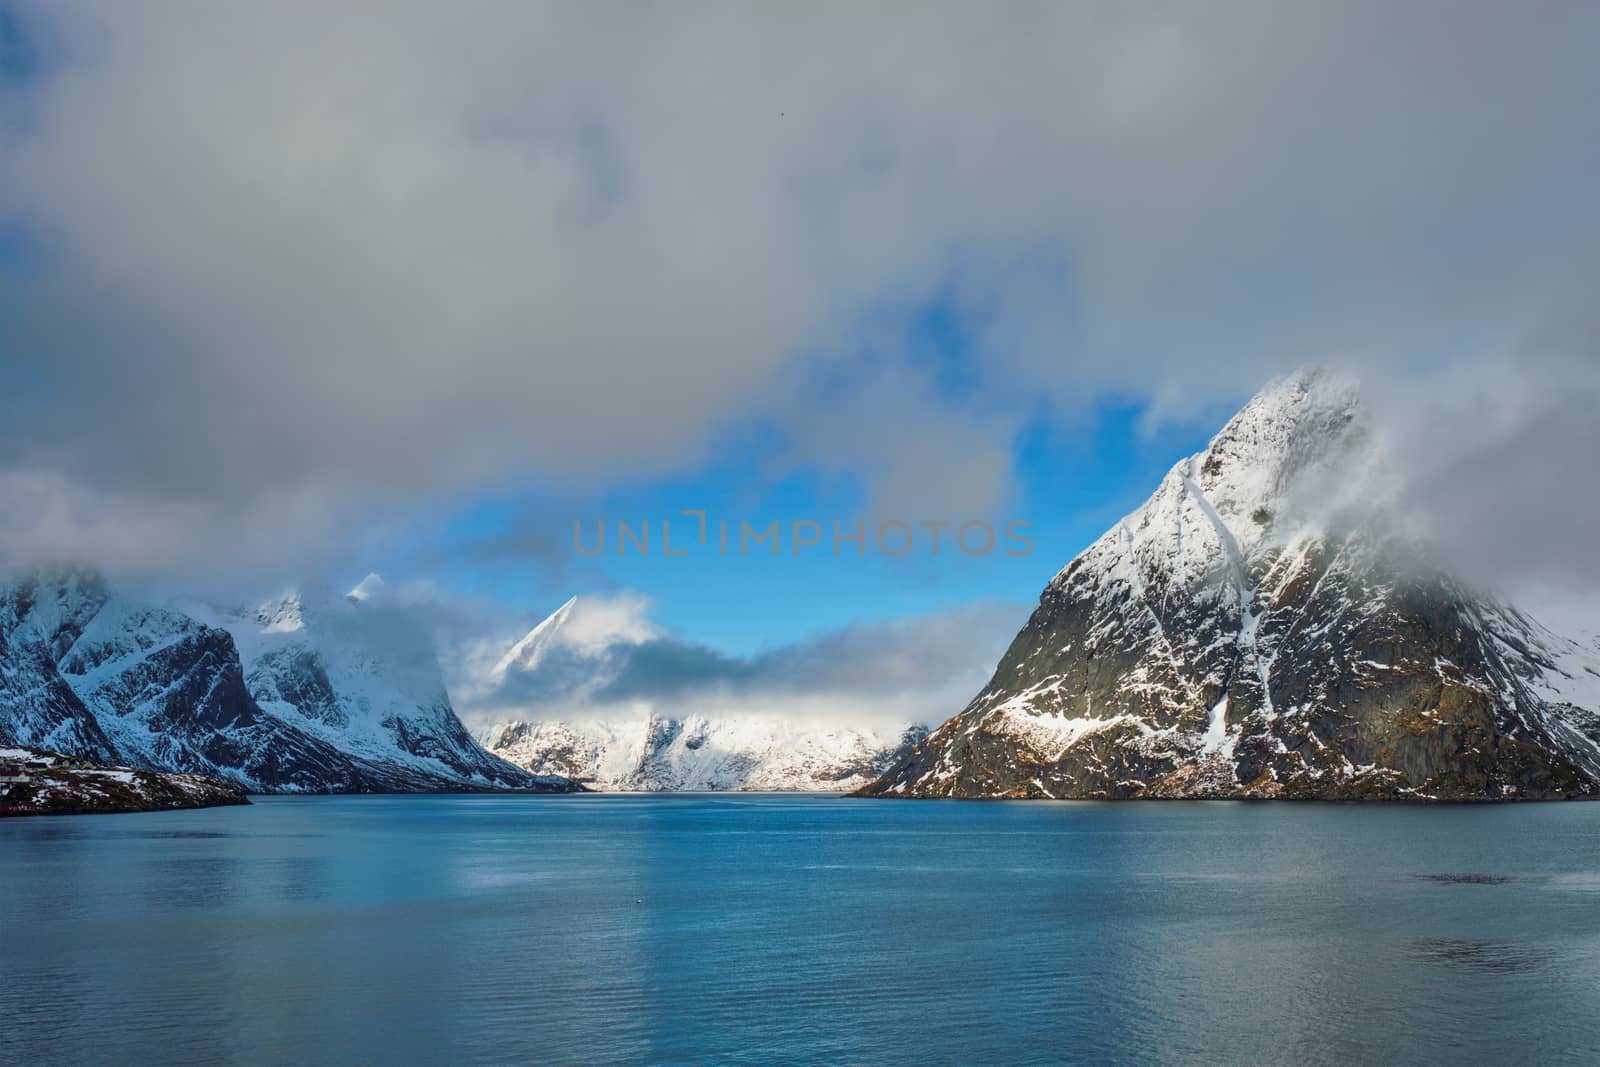 Norwegian fjord and mountains in winter. Lofoten islands, Norway by dimol